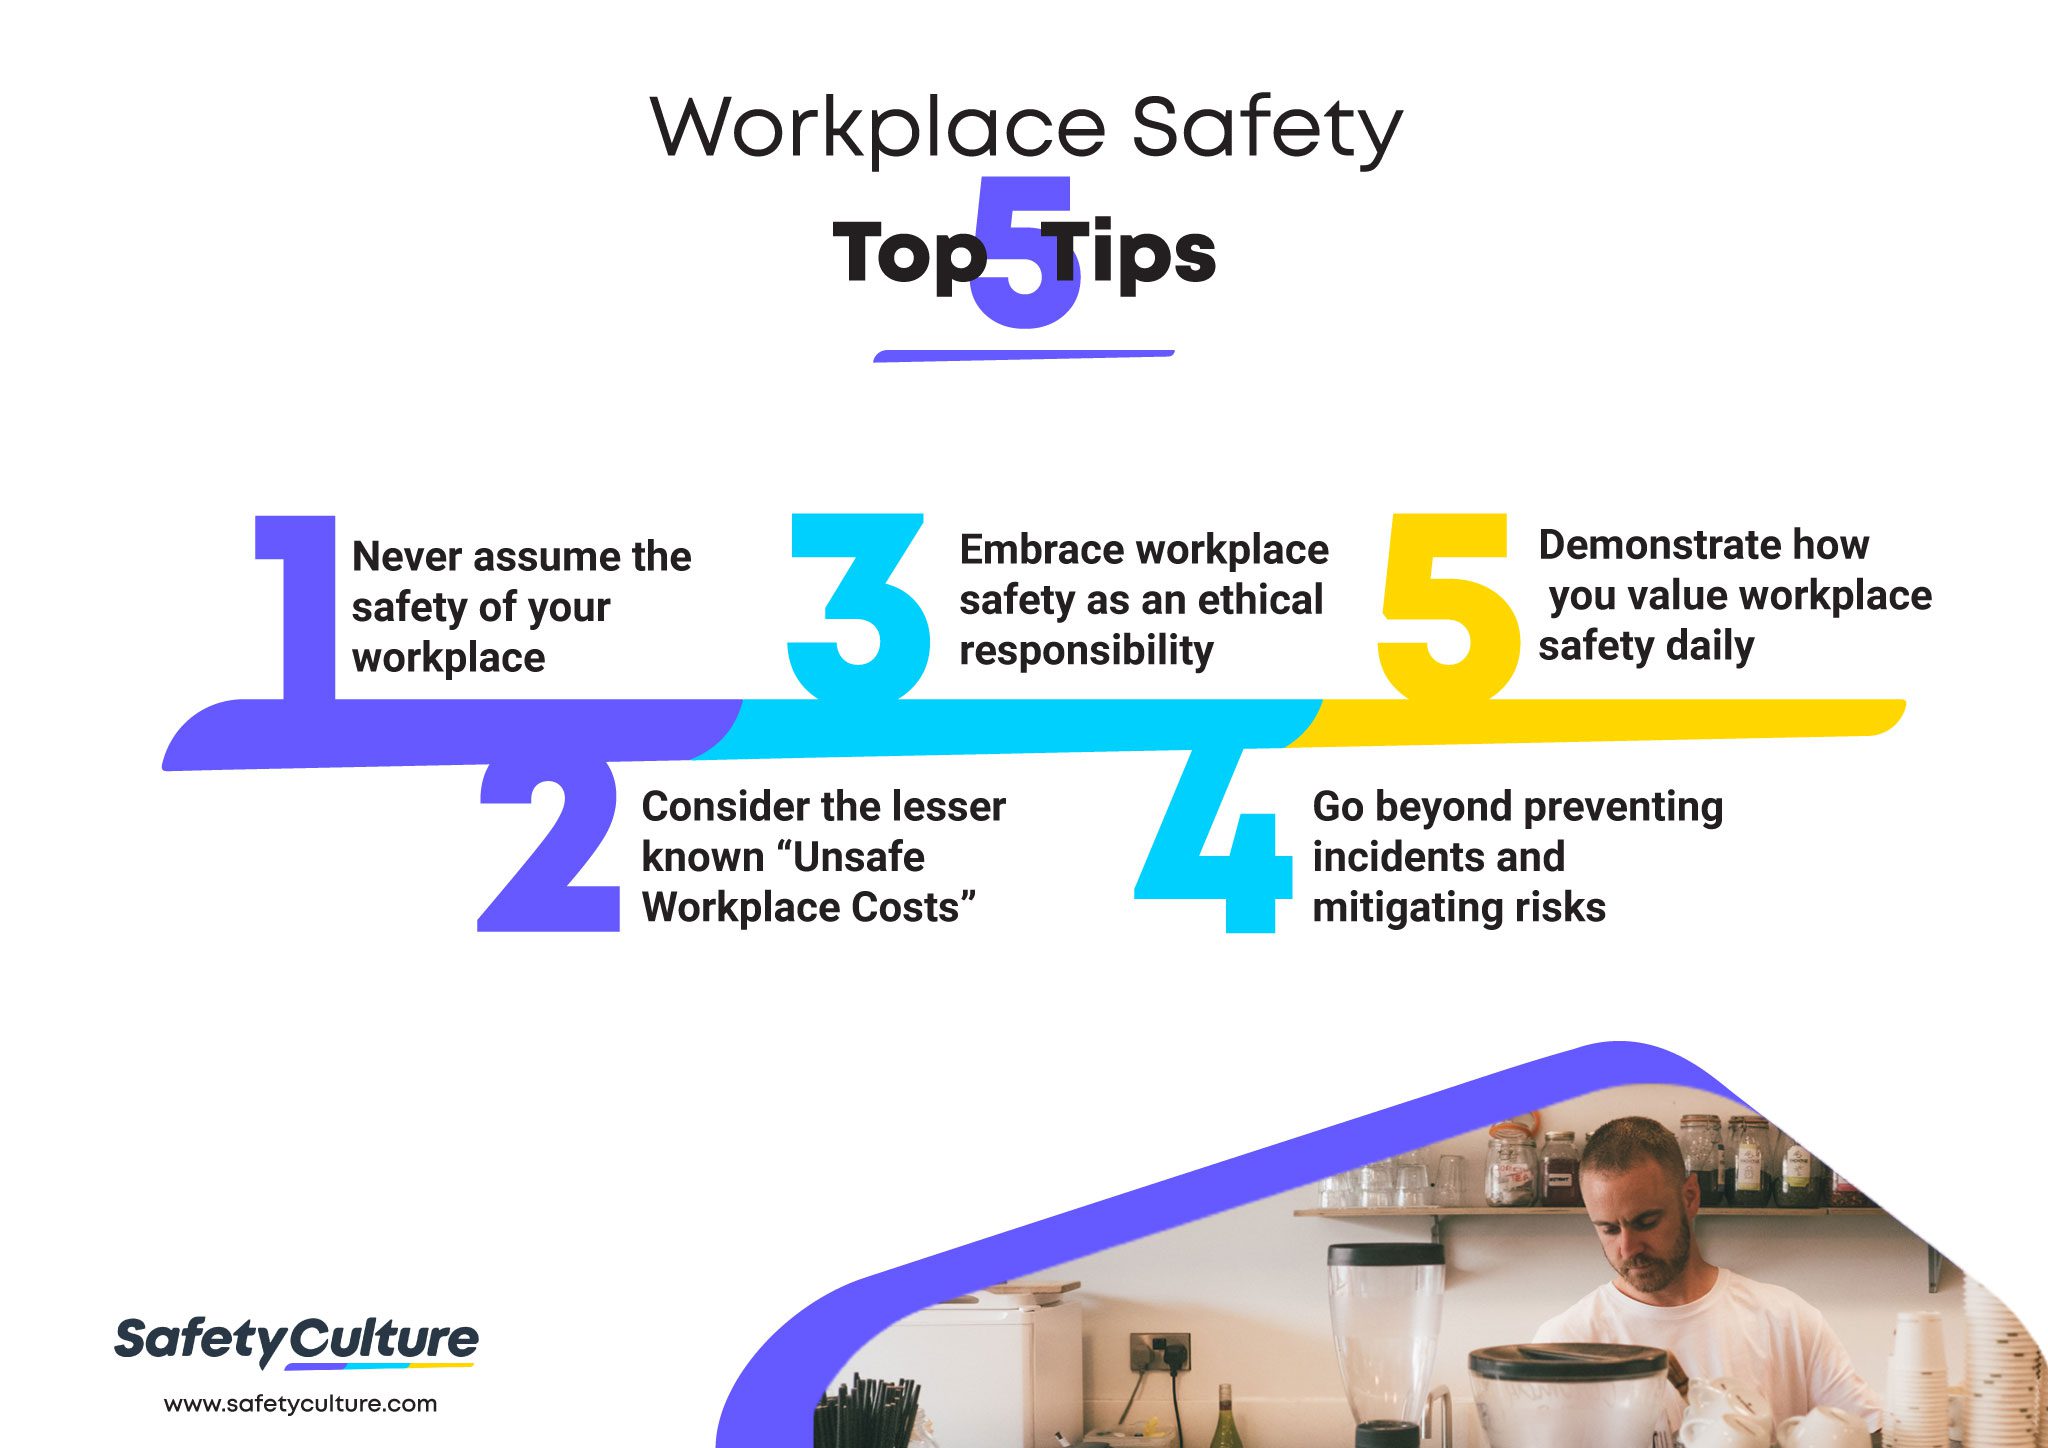 The Importance of Workplace Safety